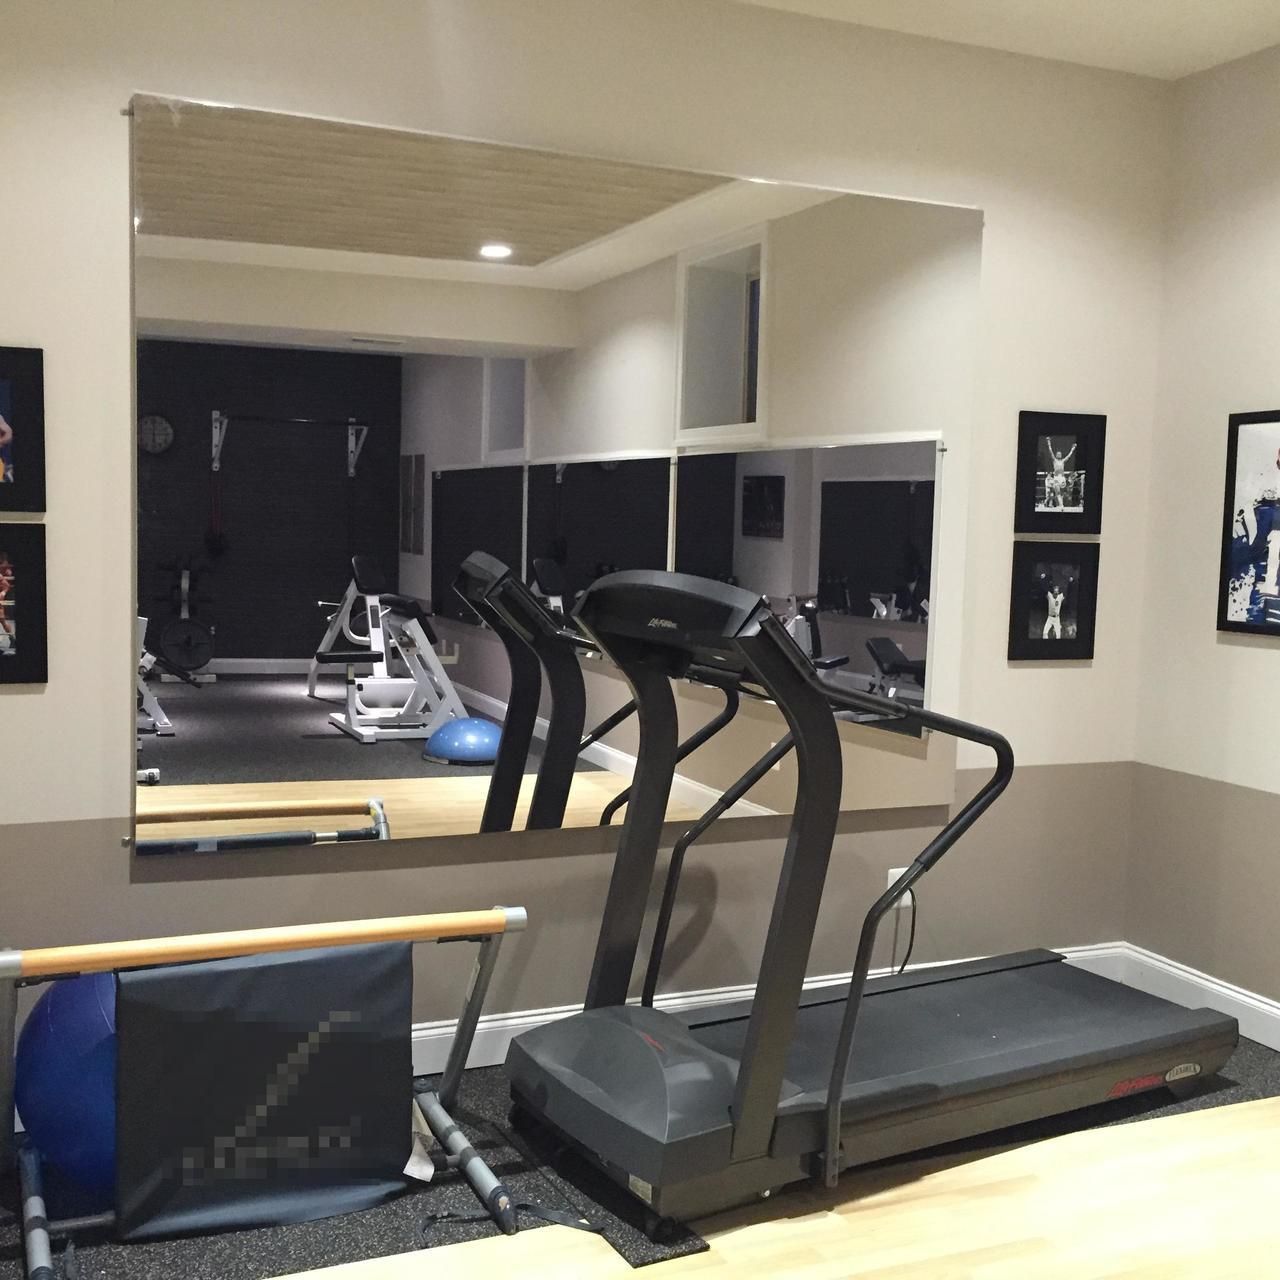 Glassless Gym Wall Mirrors - Glassless Gym Wall Mirrors -   11 fitness Room mirror ideas